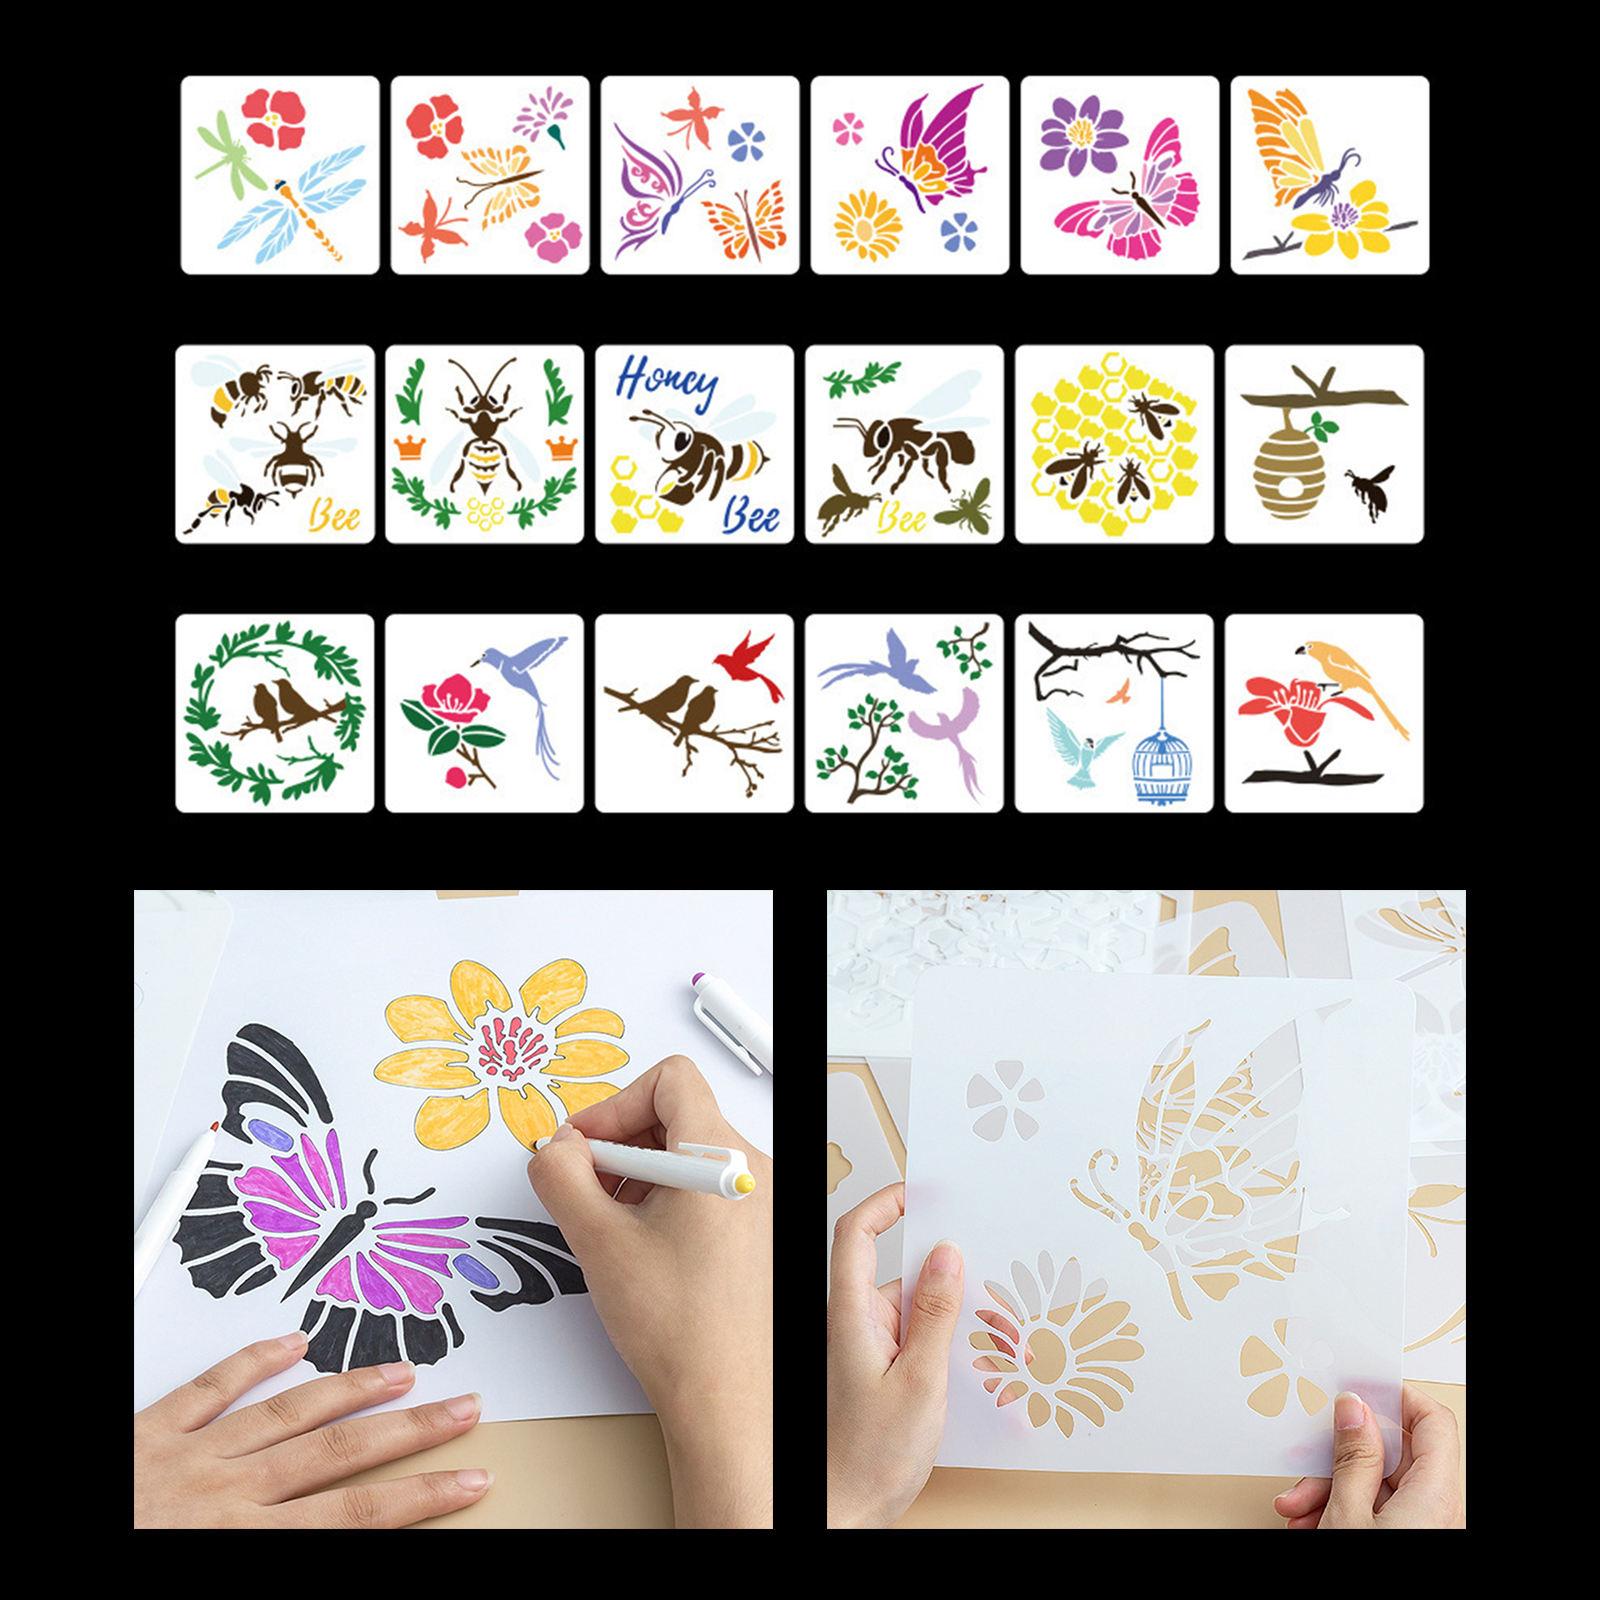 18Pcs Bees Birds Templates Stencils DIY Wall Cake Painting Art Project Gifts